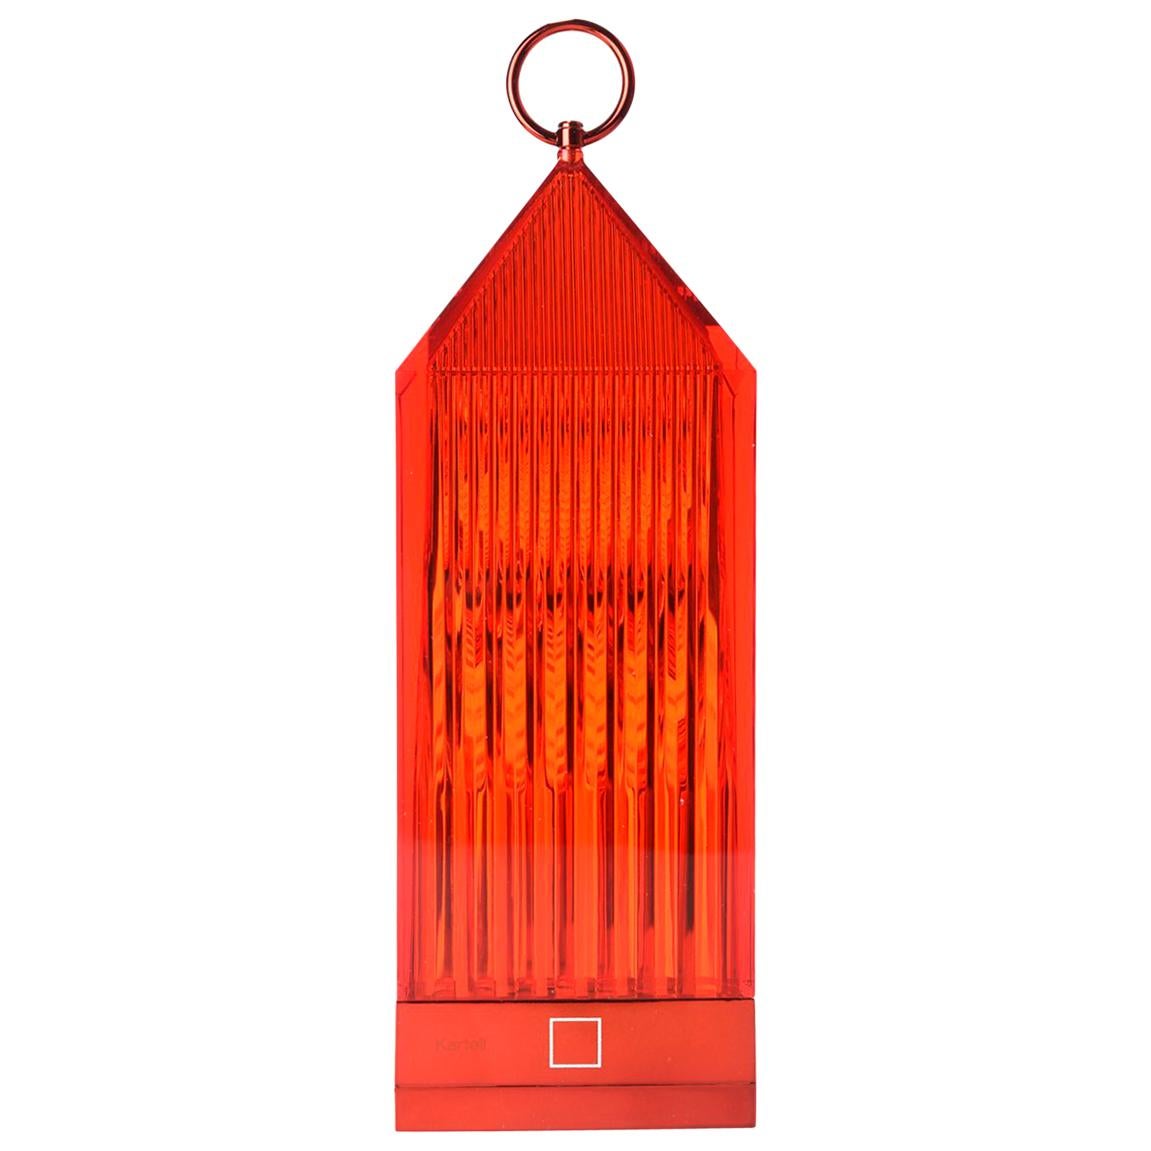 Set of 4 Kartell Lantern Table Lamps in Red by Fabio Novembre For Sale